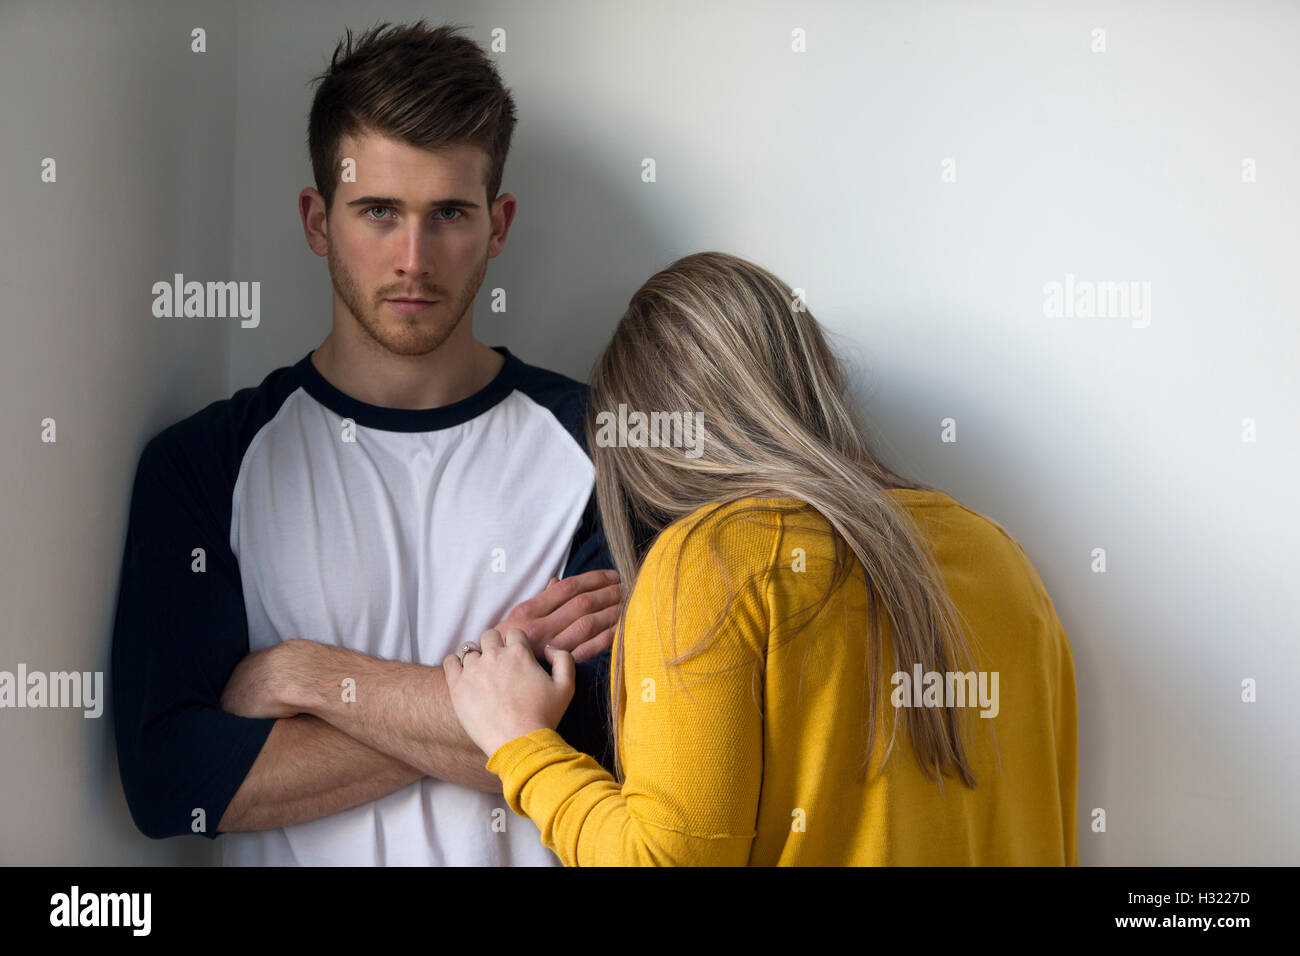 Young woman crying on her partners shoulder. He is looking at the camera with his arms folded. Stock Photo